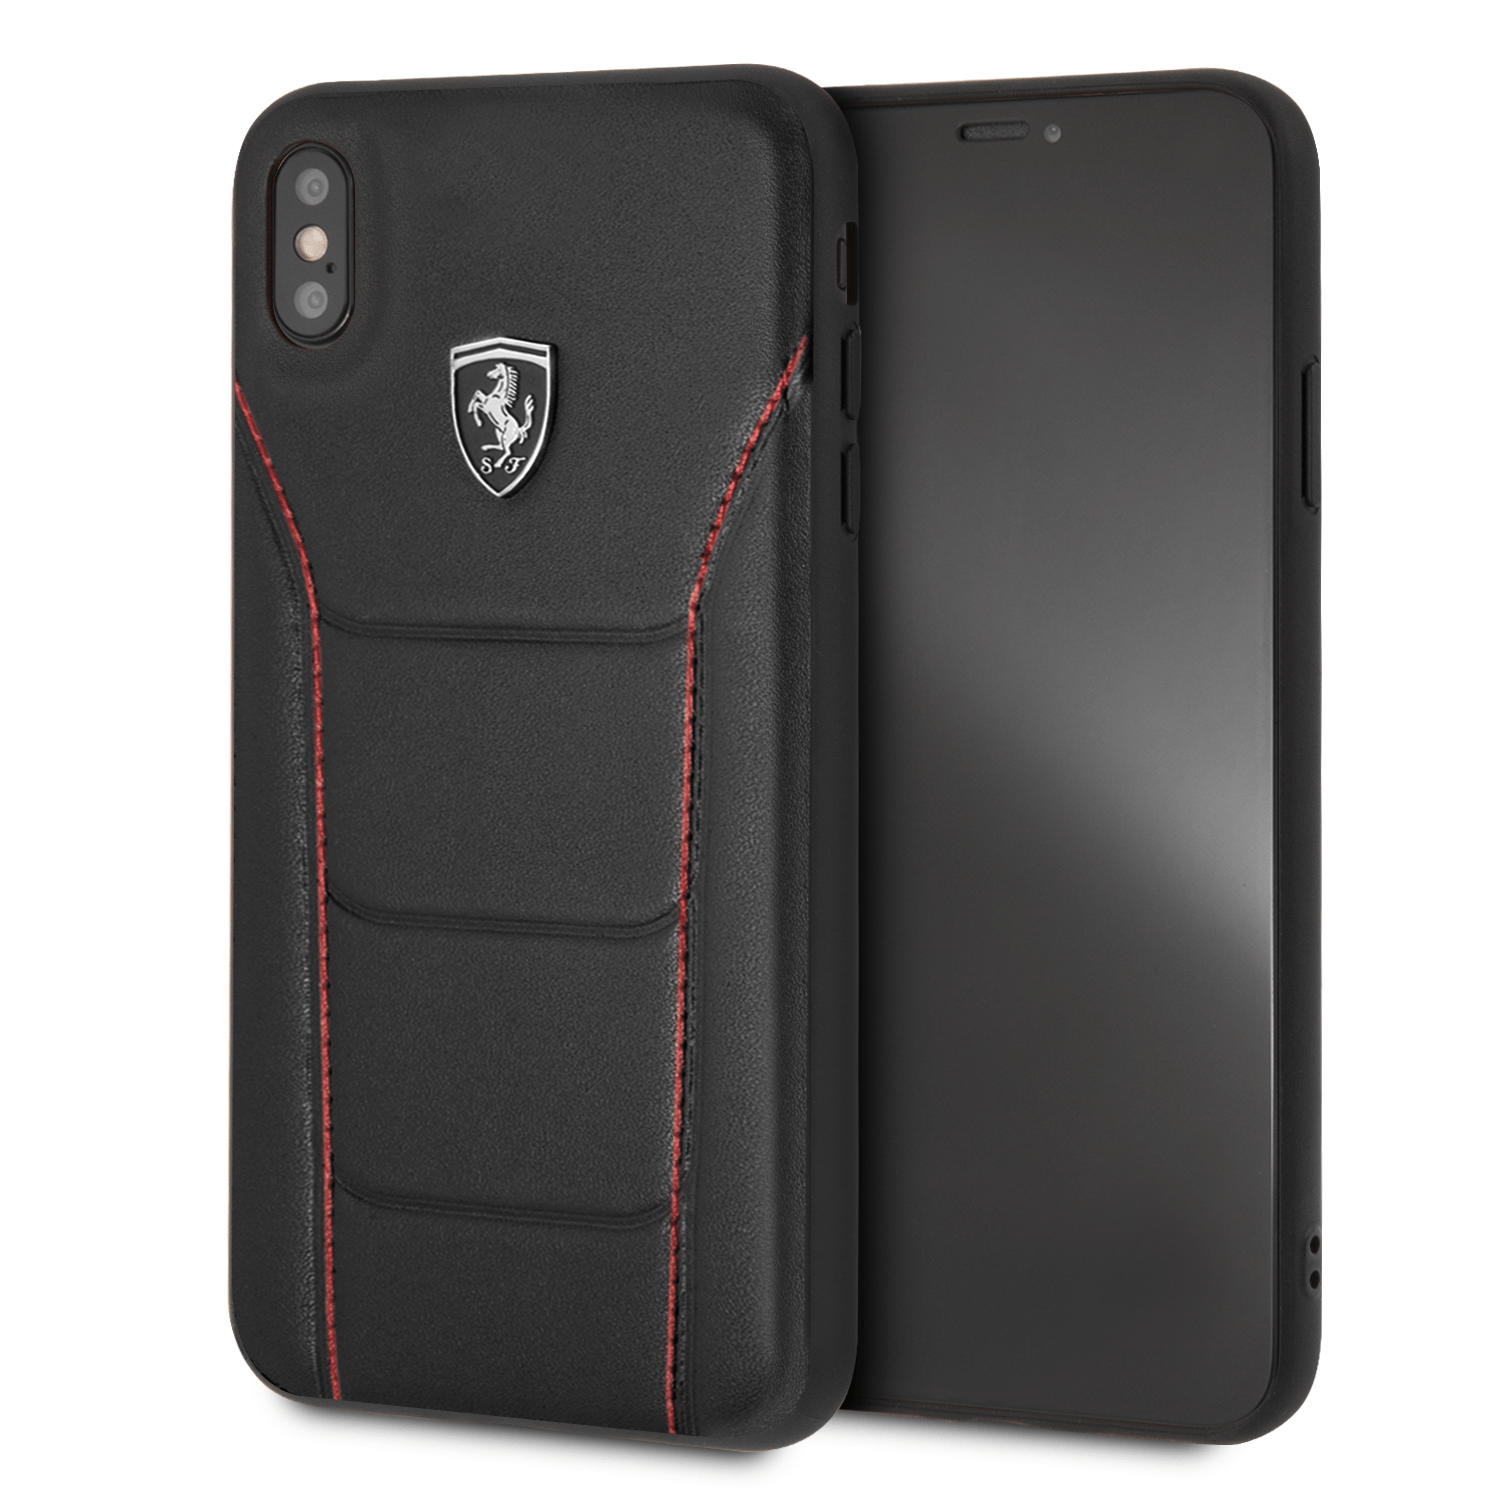 Official Ferrari Genuine Leather Heritage Black Case for iPhone XS Max